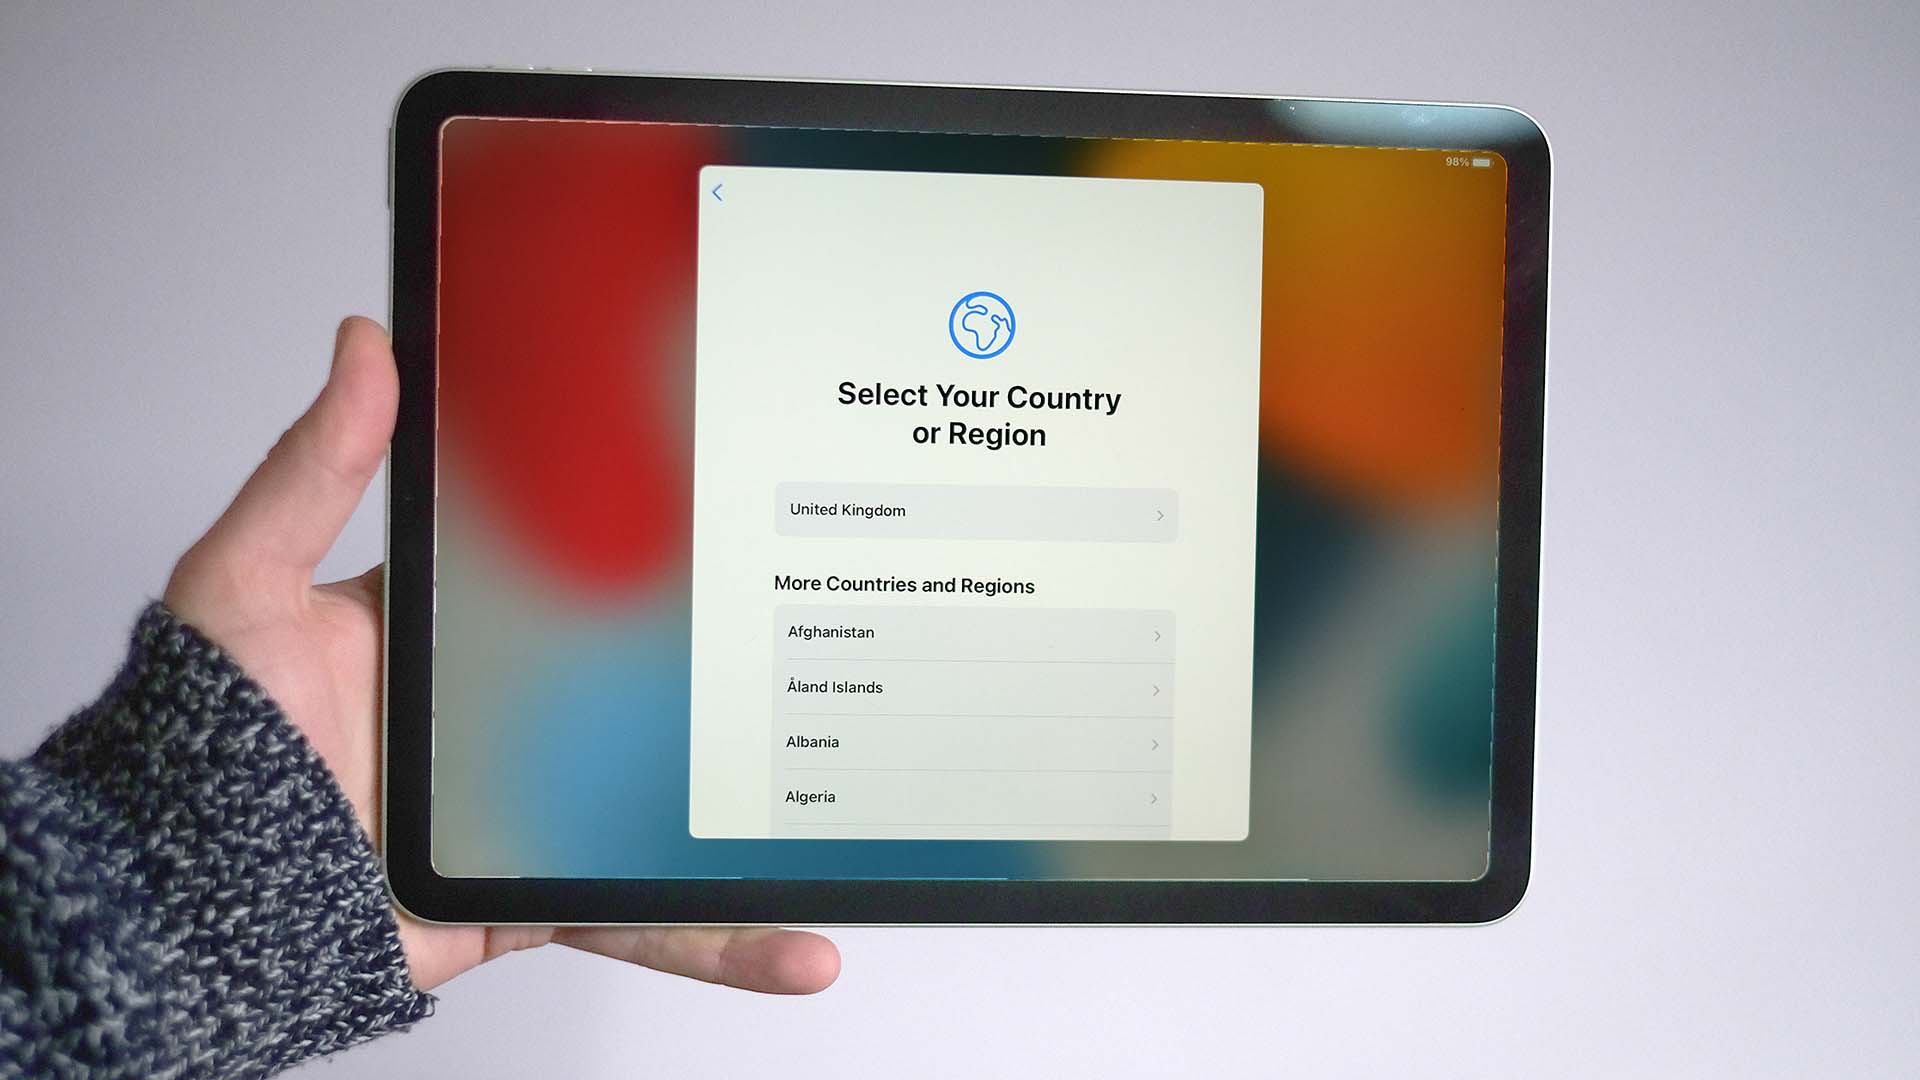 An iPad with the screen showing the options for selecting a country or region